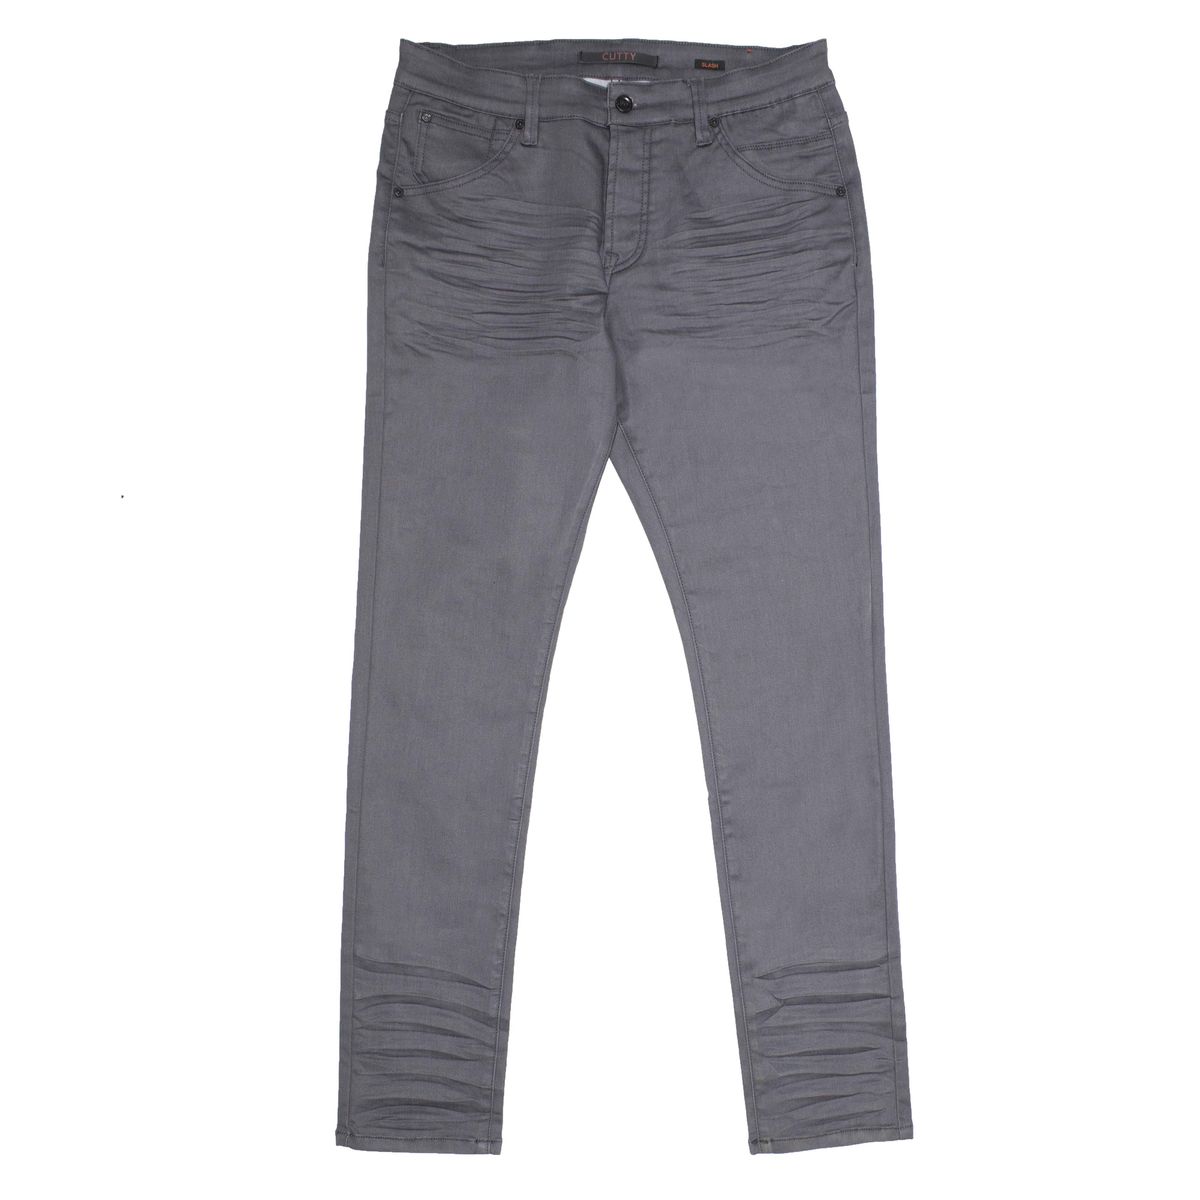 Cutty CRoot Skinny Fit Jeans | Shop Today. Get it Tomorrow! | takealot.com